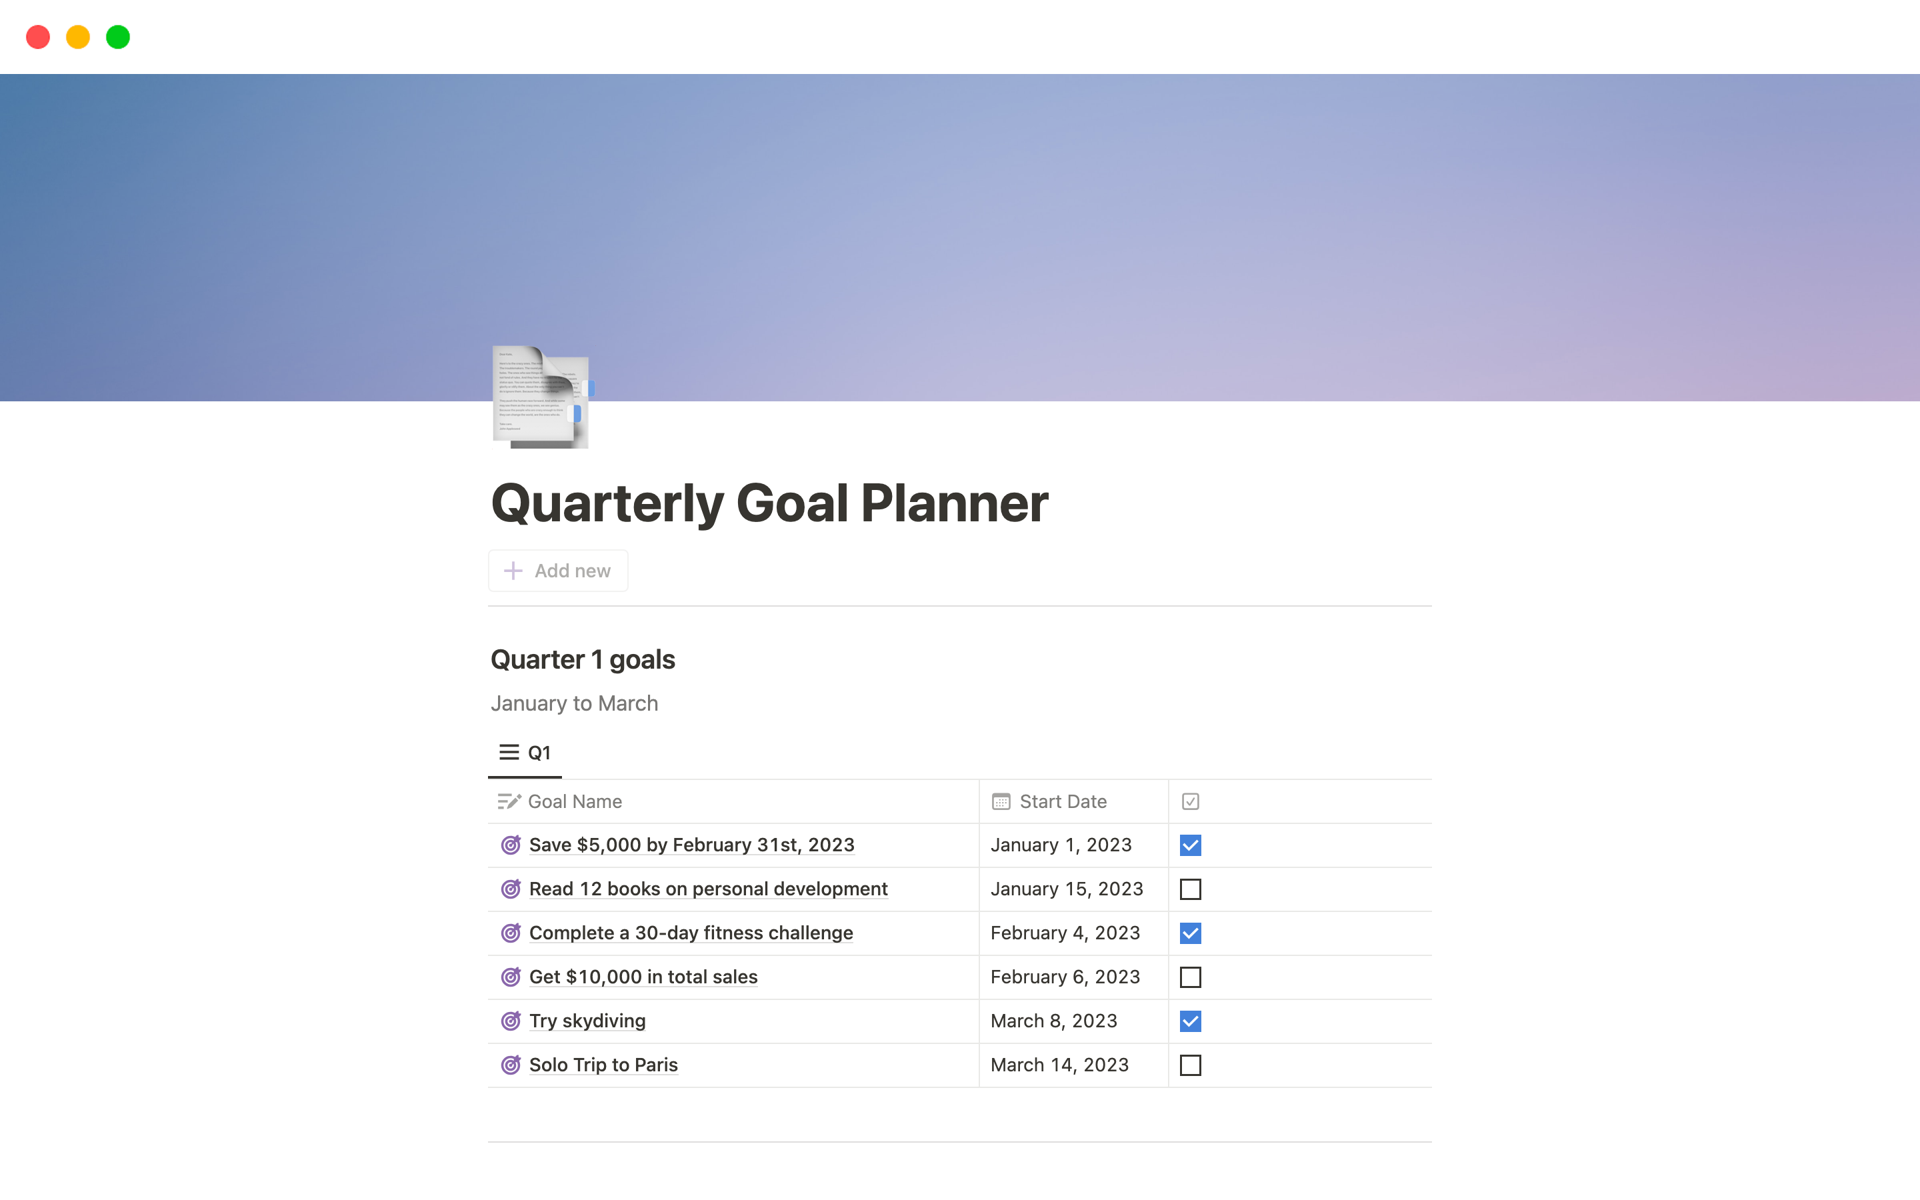 The Quarterly Goal Planner is a goal-setting template that allows you to add and organize your goals within each quarter, from Quarter 1 to Quarter 4.